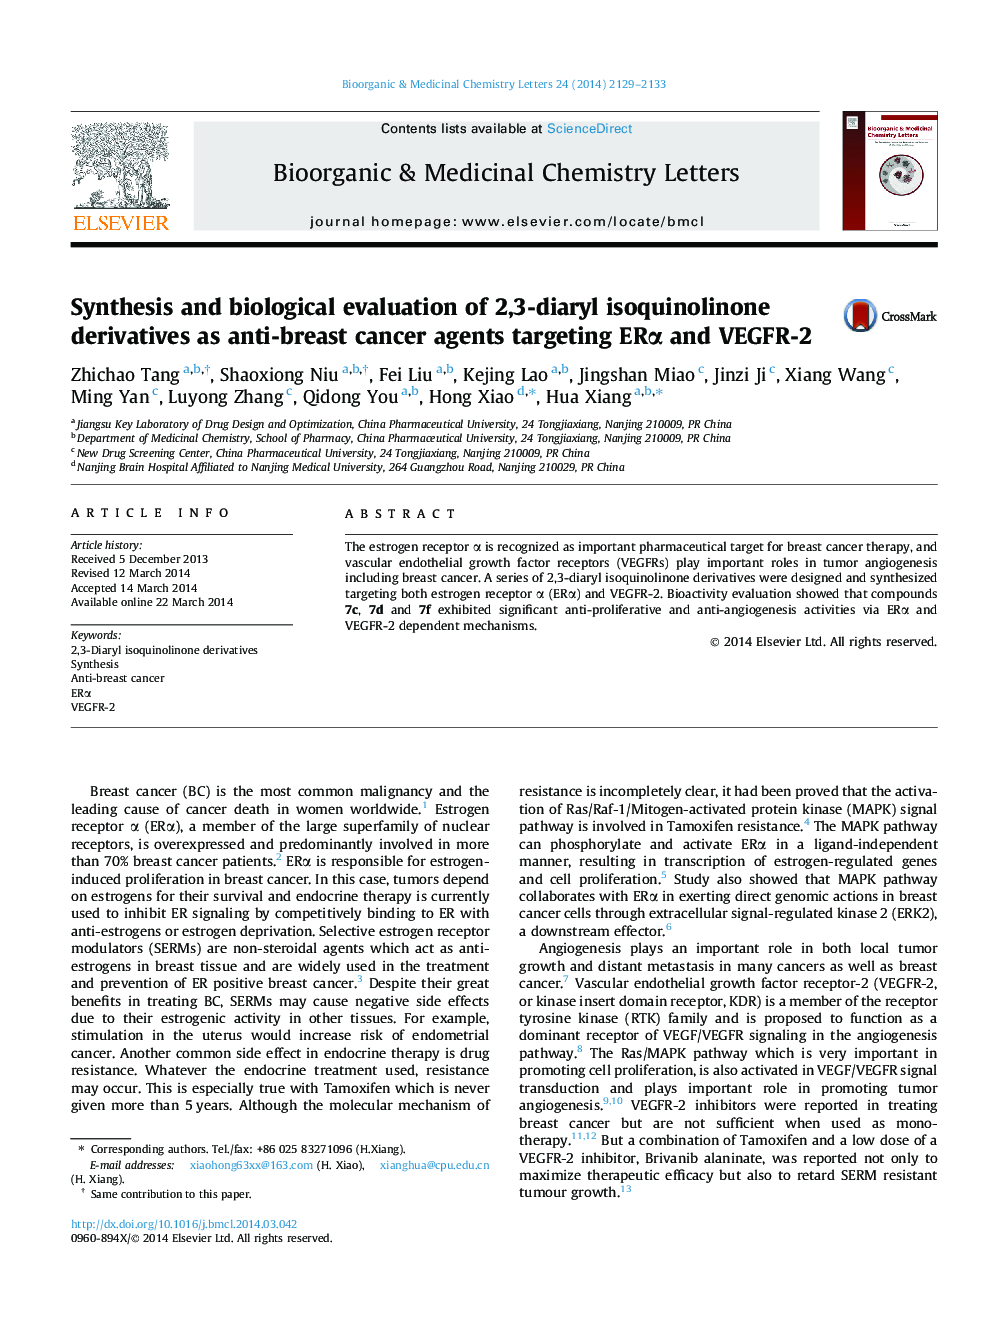 Synthesis and biological evaluation of 2,3-diaryl isoquinolinone derivatives as anti-breast cancer agents targeting ERÎ± and VEGFR-2